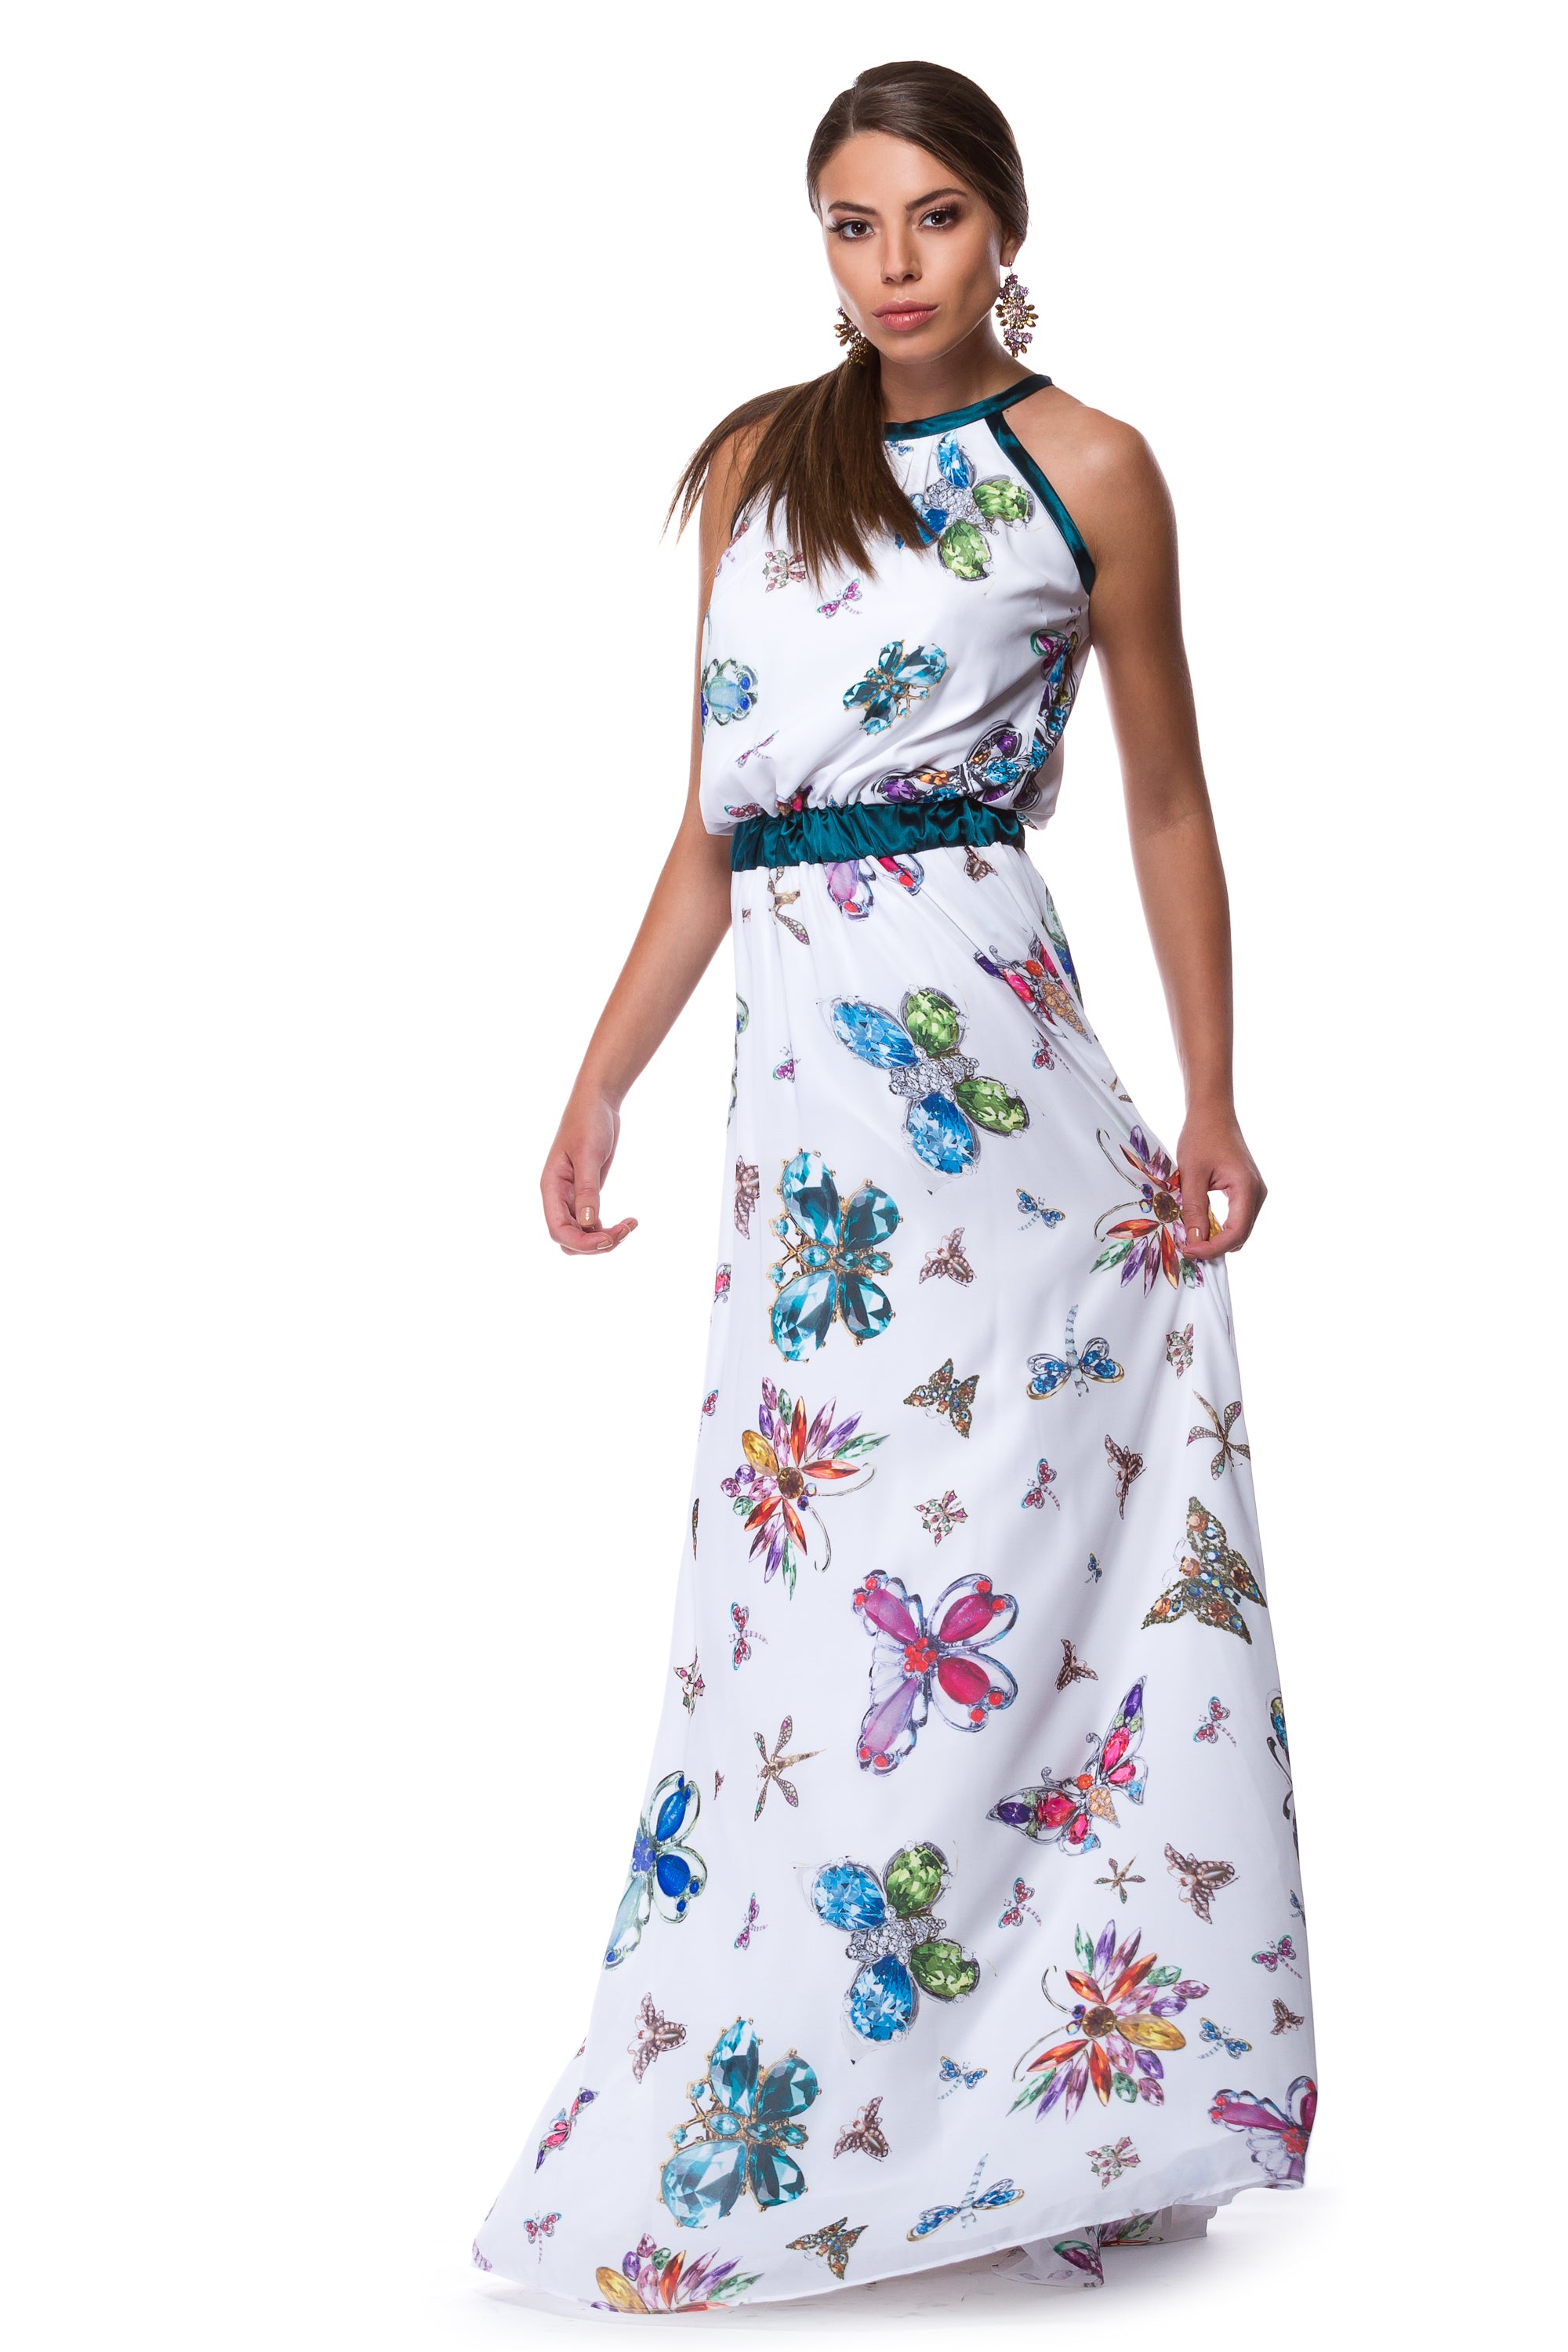 Long white chiffon dress with butterfly print WDR-0005